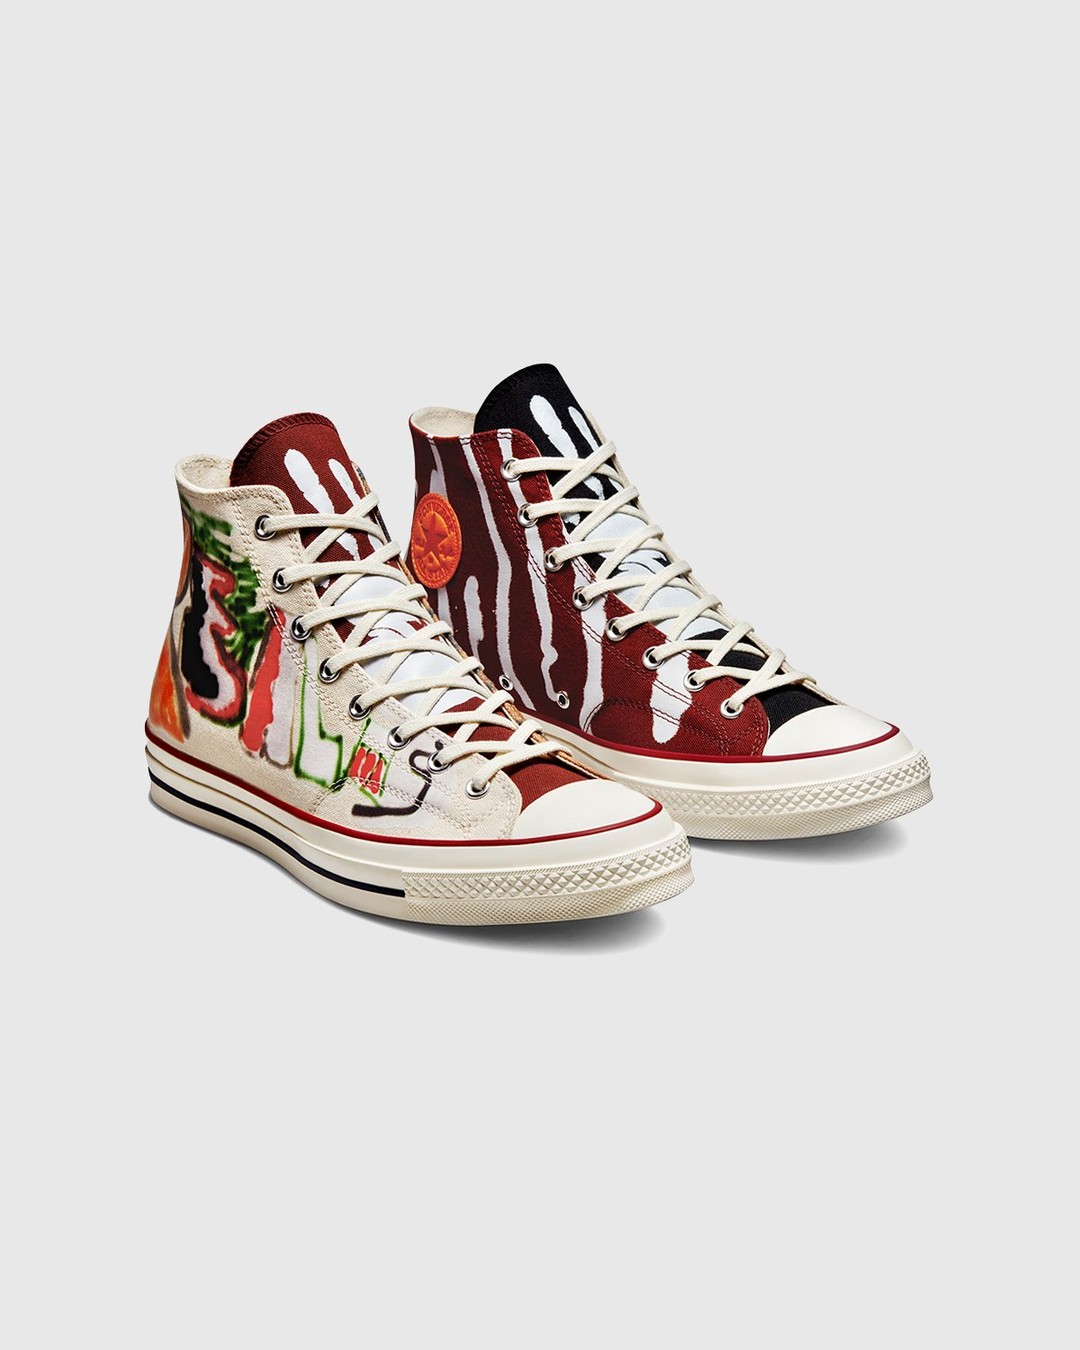 Converse x Come Tees – Chuck 70 Hi White/Multi/Egret - Sneakers - Red - Image 3